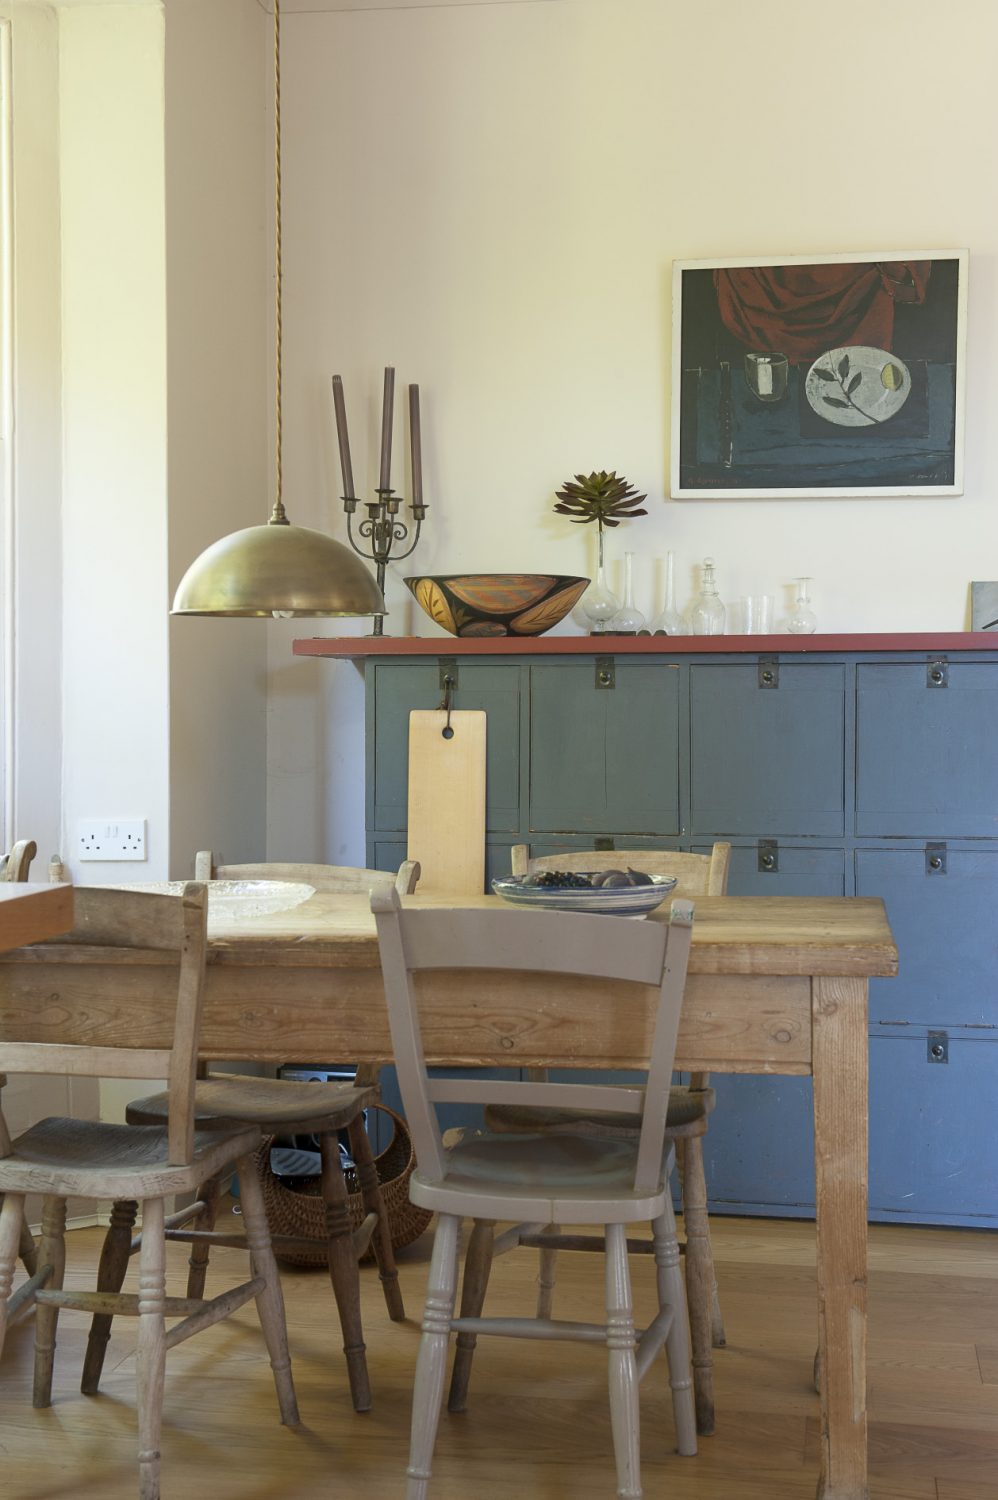 A rustic stripped-wood table sits in the corner of the large kitchen-cum-dining room, with side cupboards painted in a strong blue to complement the colour of the ‘unfitted’ kitchen